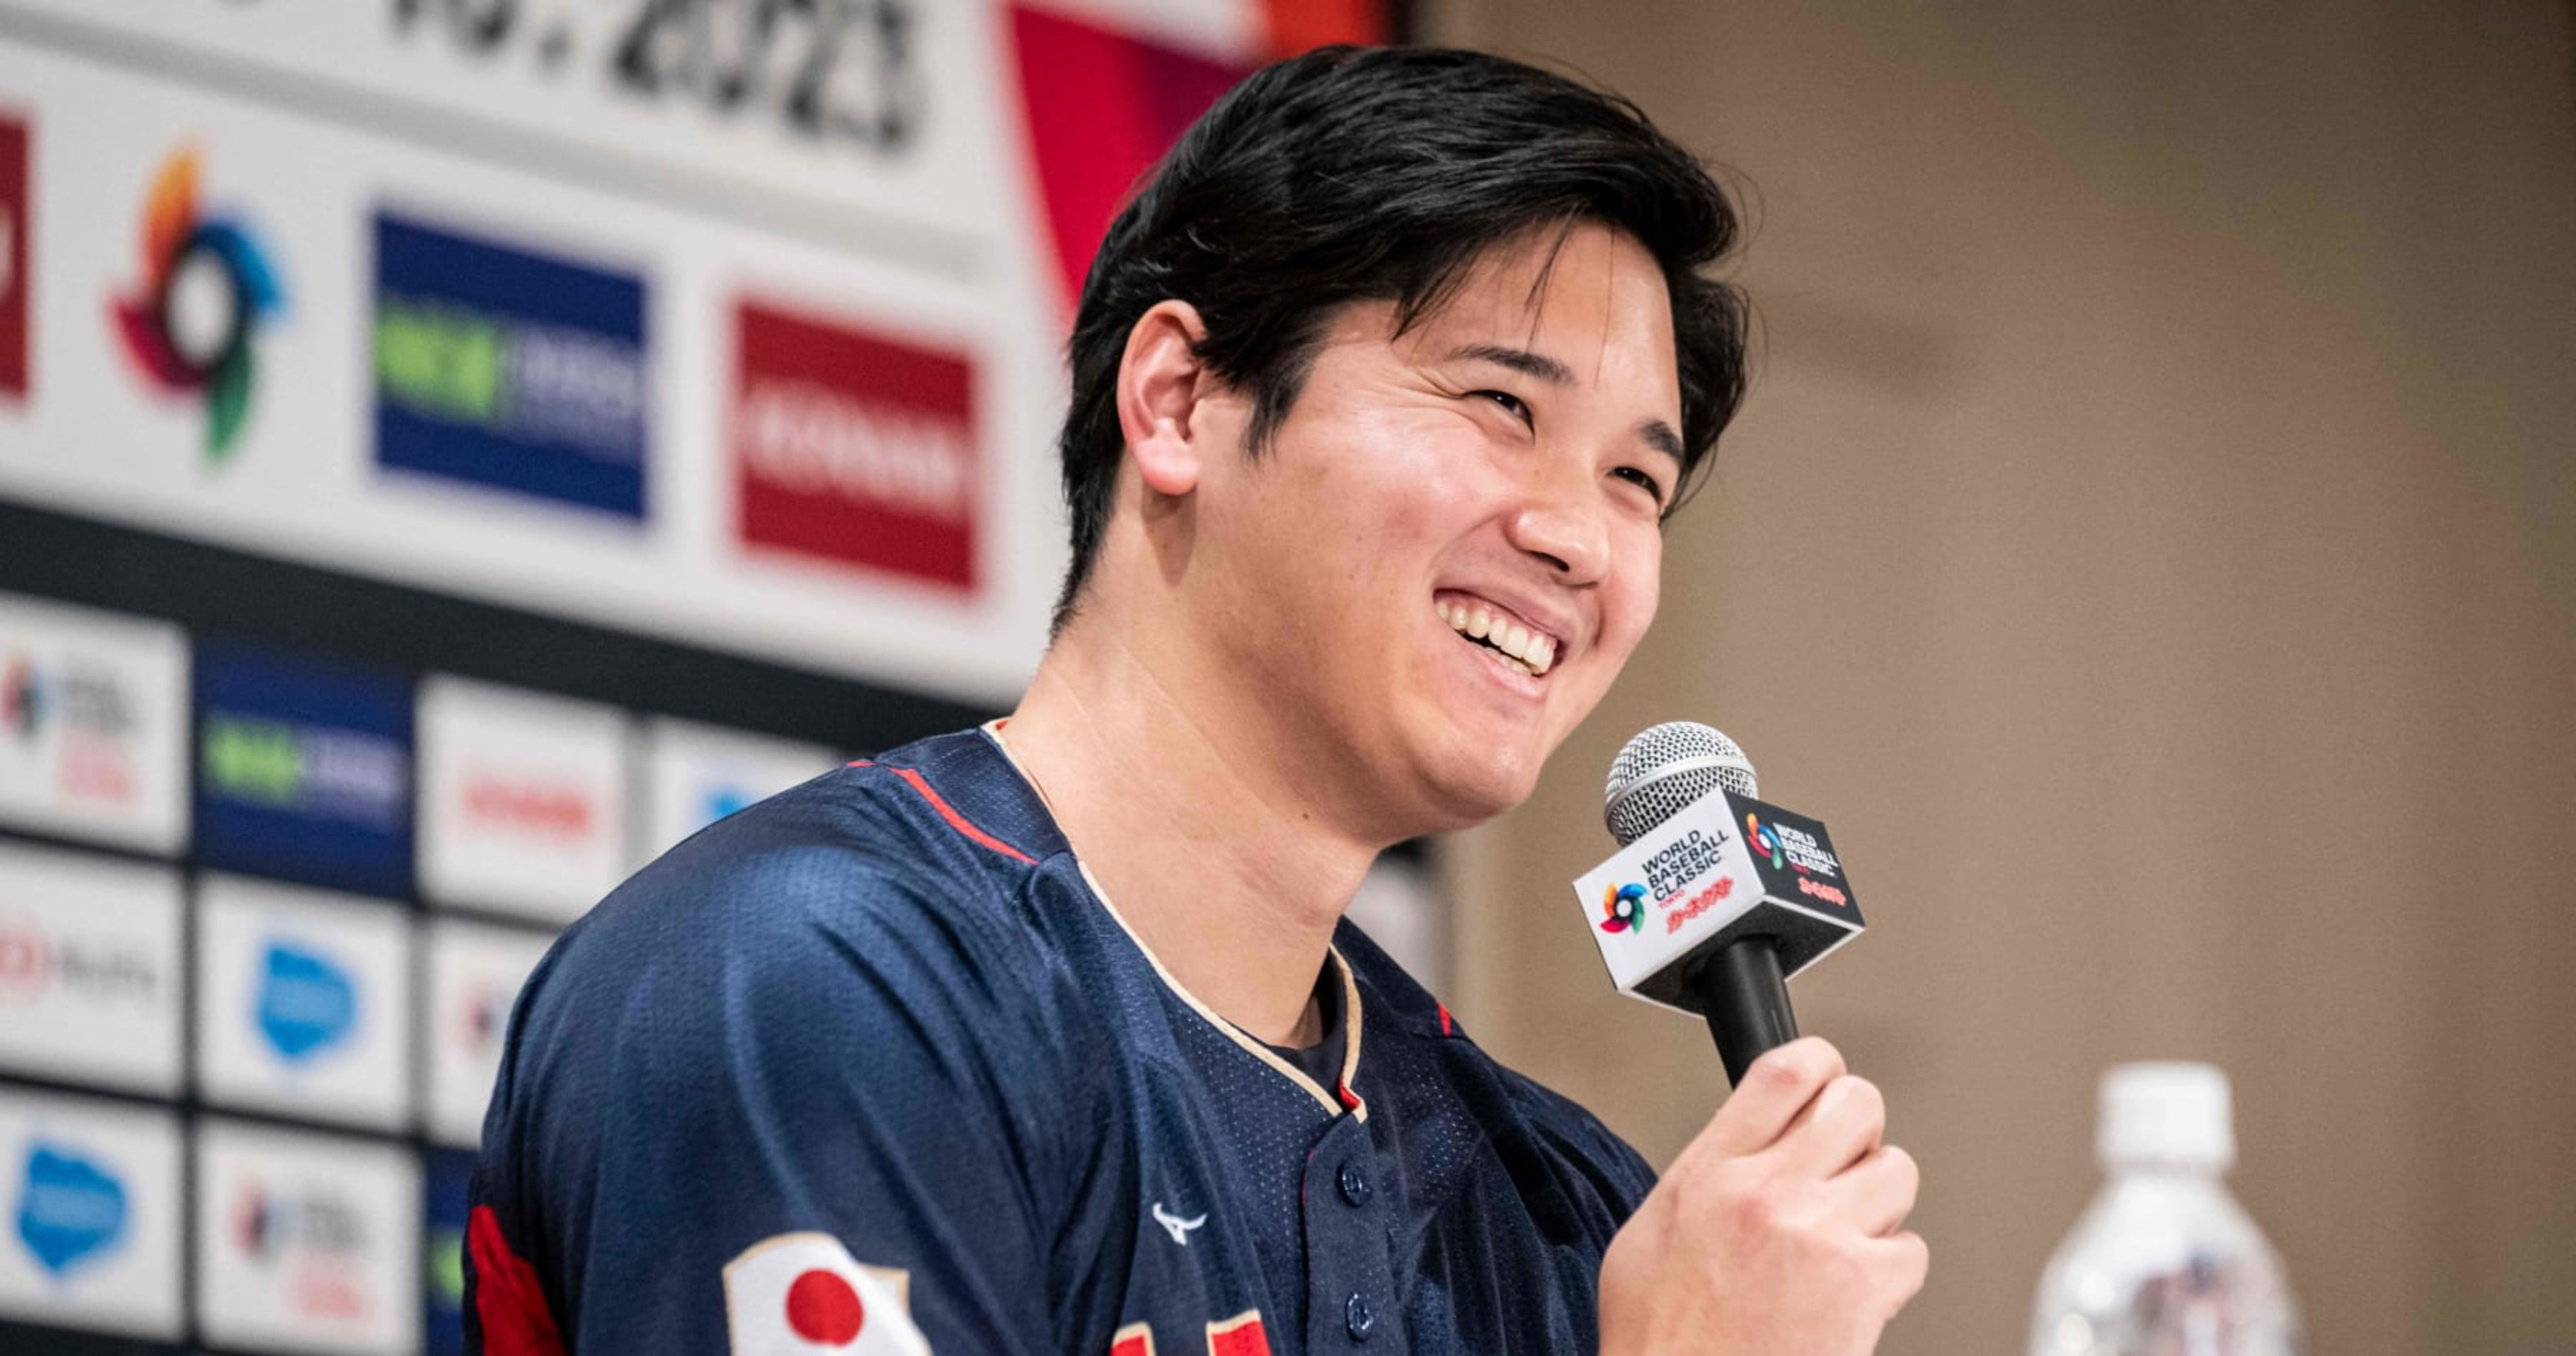 Shohei Ohtani: The Padres have laid the groundwork to sign the